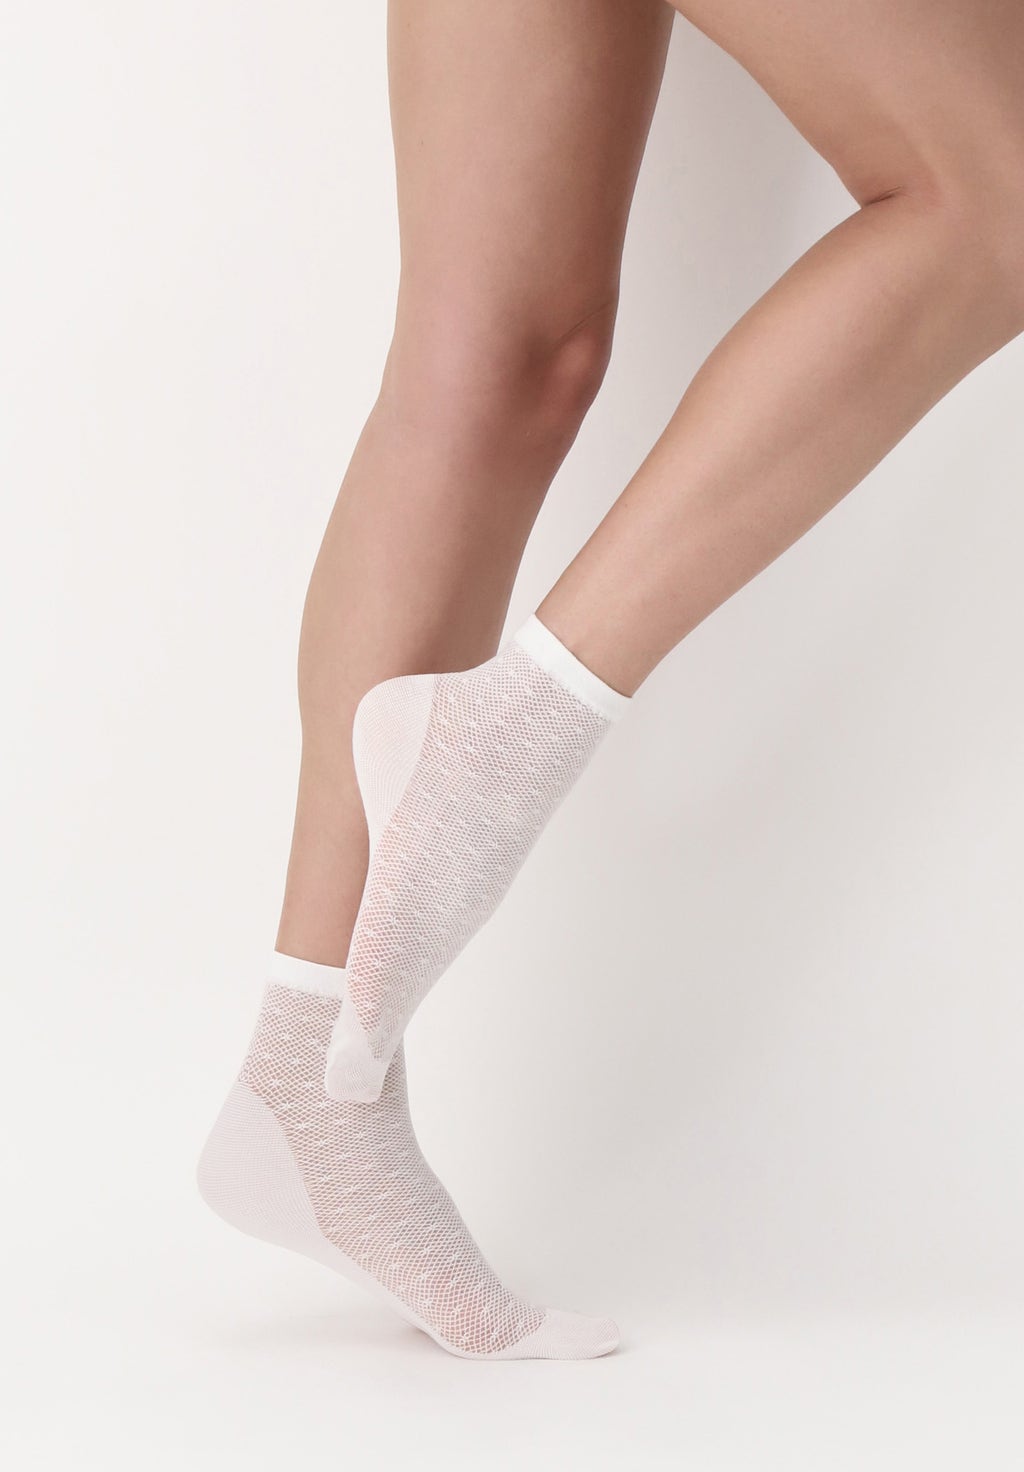 OroblÌ_ Eco Sneaker Sock - White (milk) environmentally friendly fashion quarter high ankle socks made of recycled yarn with a semi-sheer micro-mesh base, woven all over spot pattern, plain under foot, thin cuff and shaped heel.